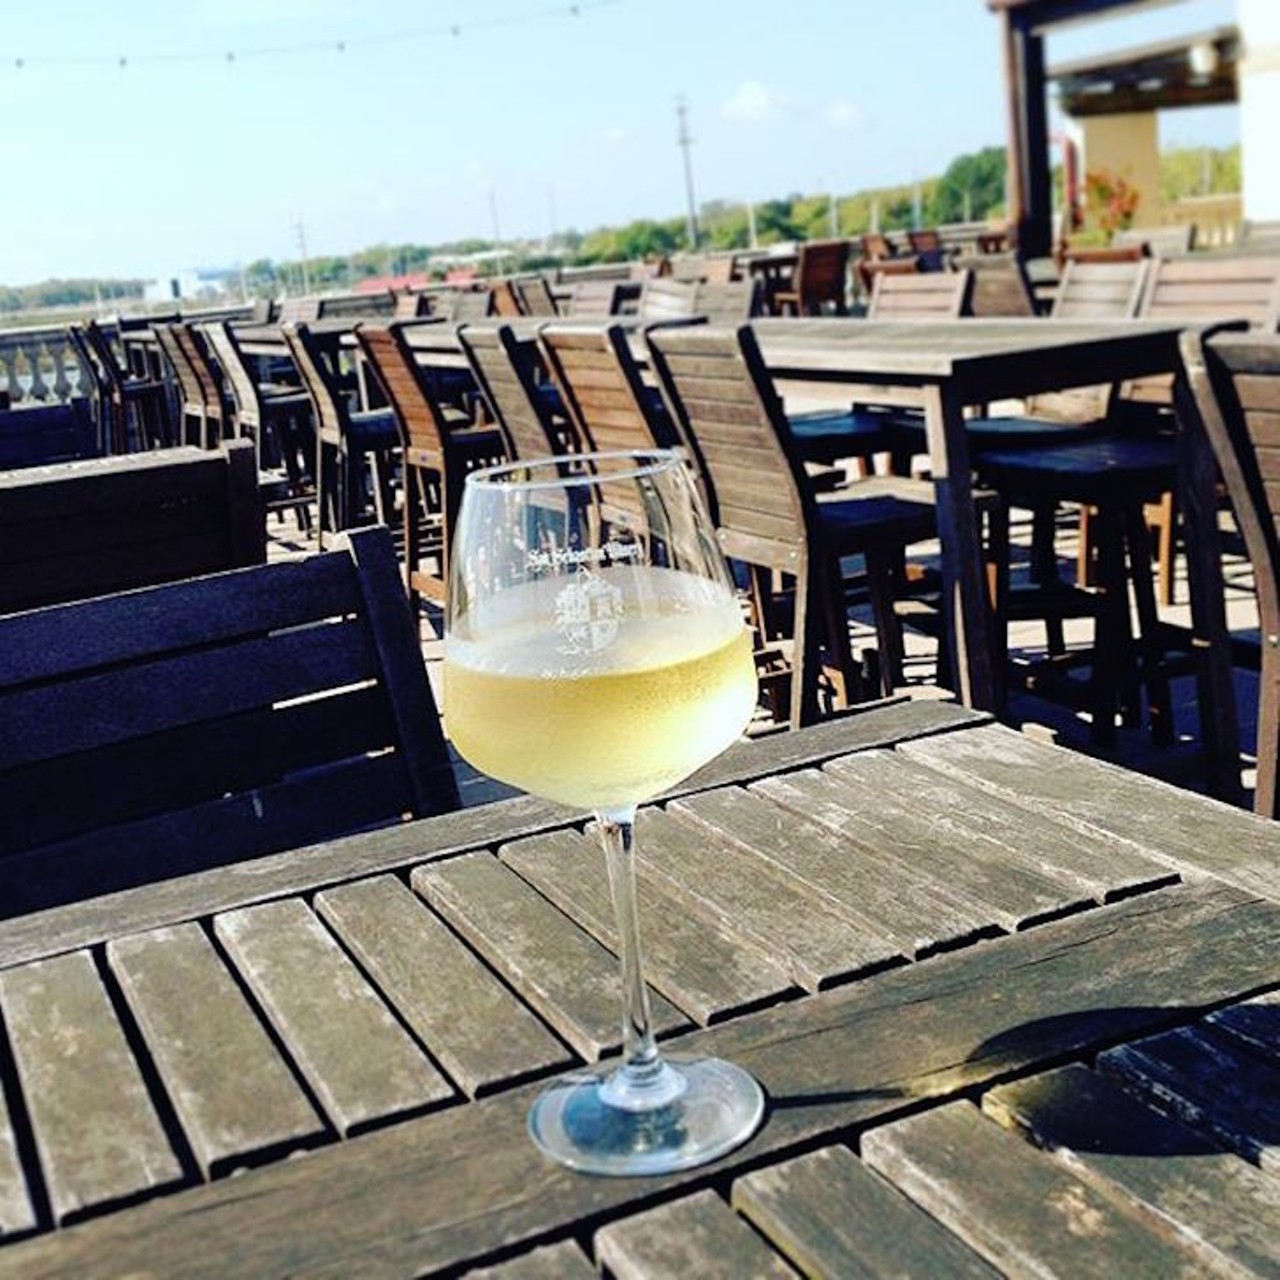 San Sebastian Winery
157 King Street, St. Augustine | 904-826-1594
After strolling down St. George Street, head over to San Sebastian for a tour and tasting. When you&#146;re done, head on up to the swinging jazz and blues bar upstairs to try a bottle of your favorite. 
Photo via sansebastianwinery/Instagram